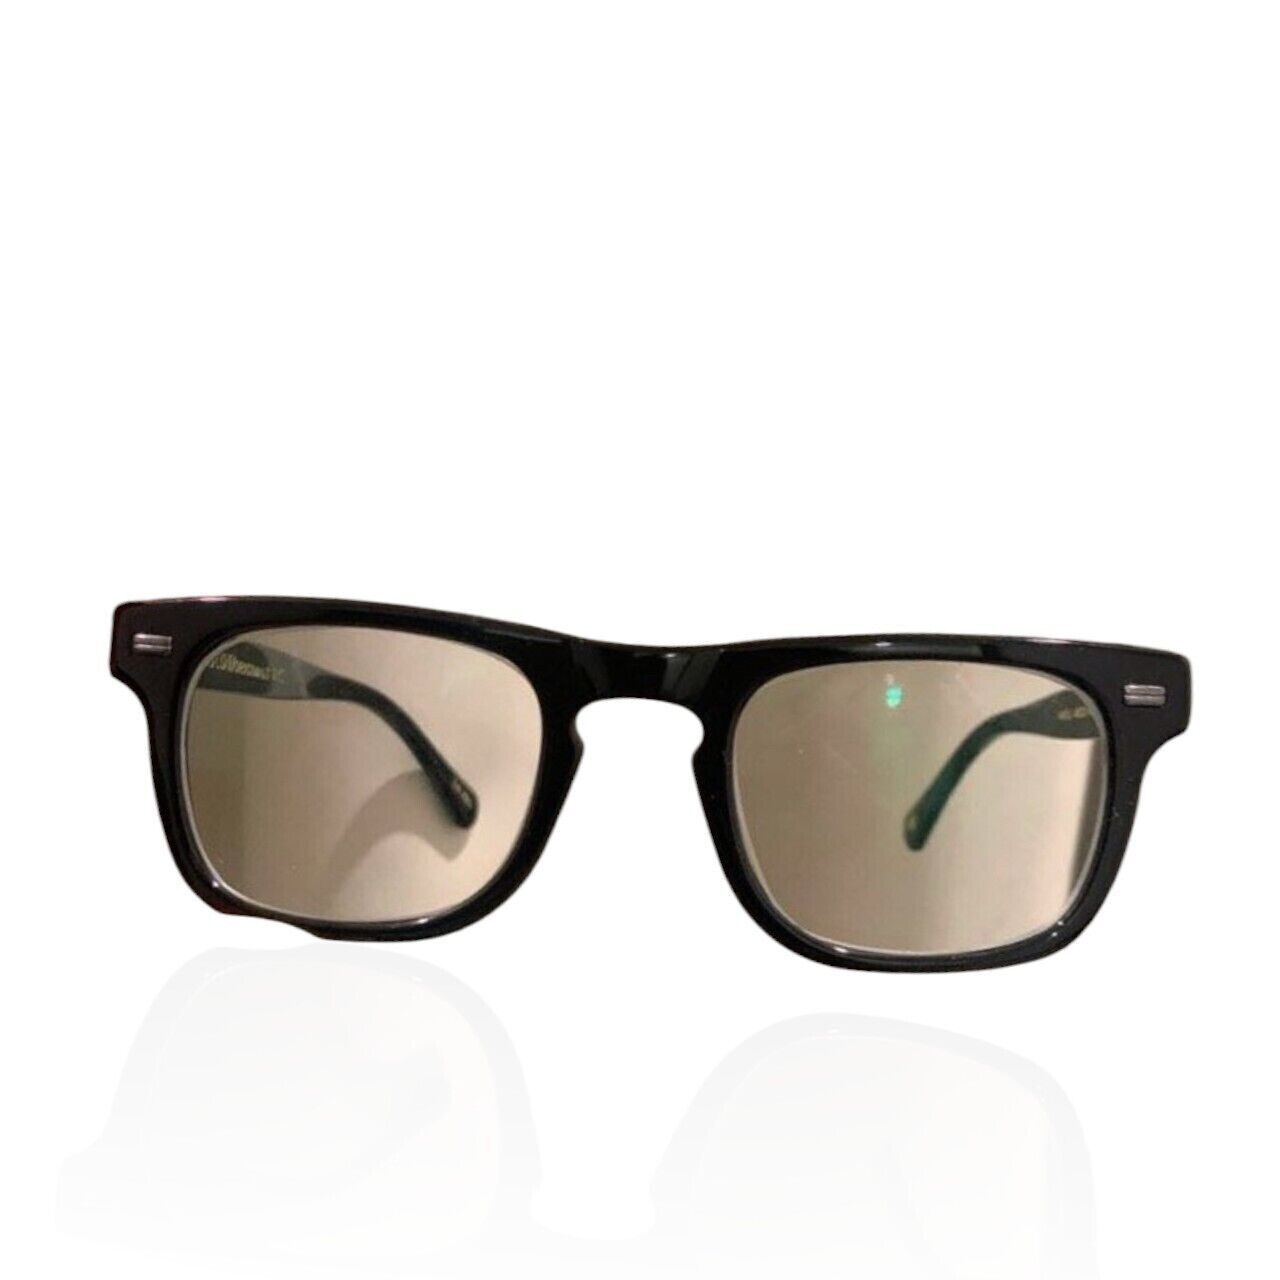 MOSCOT 23-145 Kavell Eye Glasses